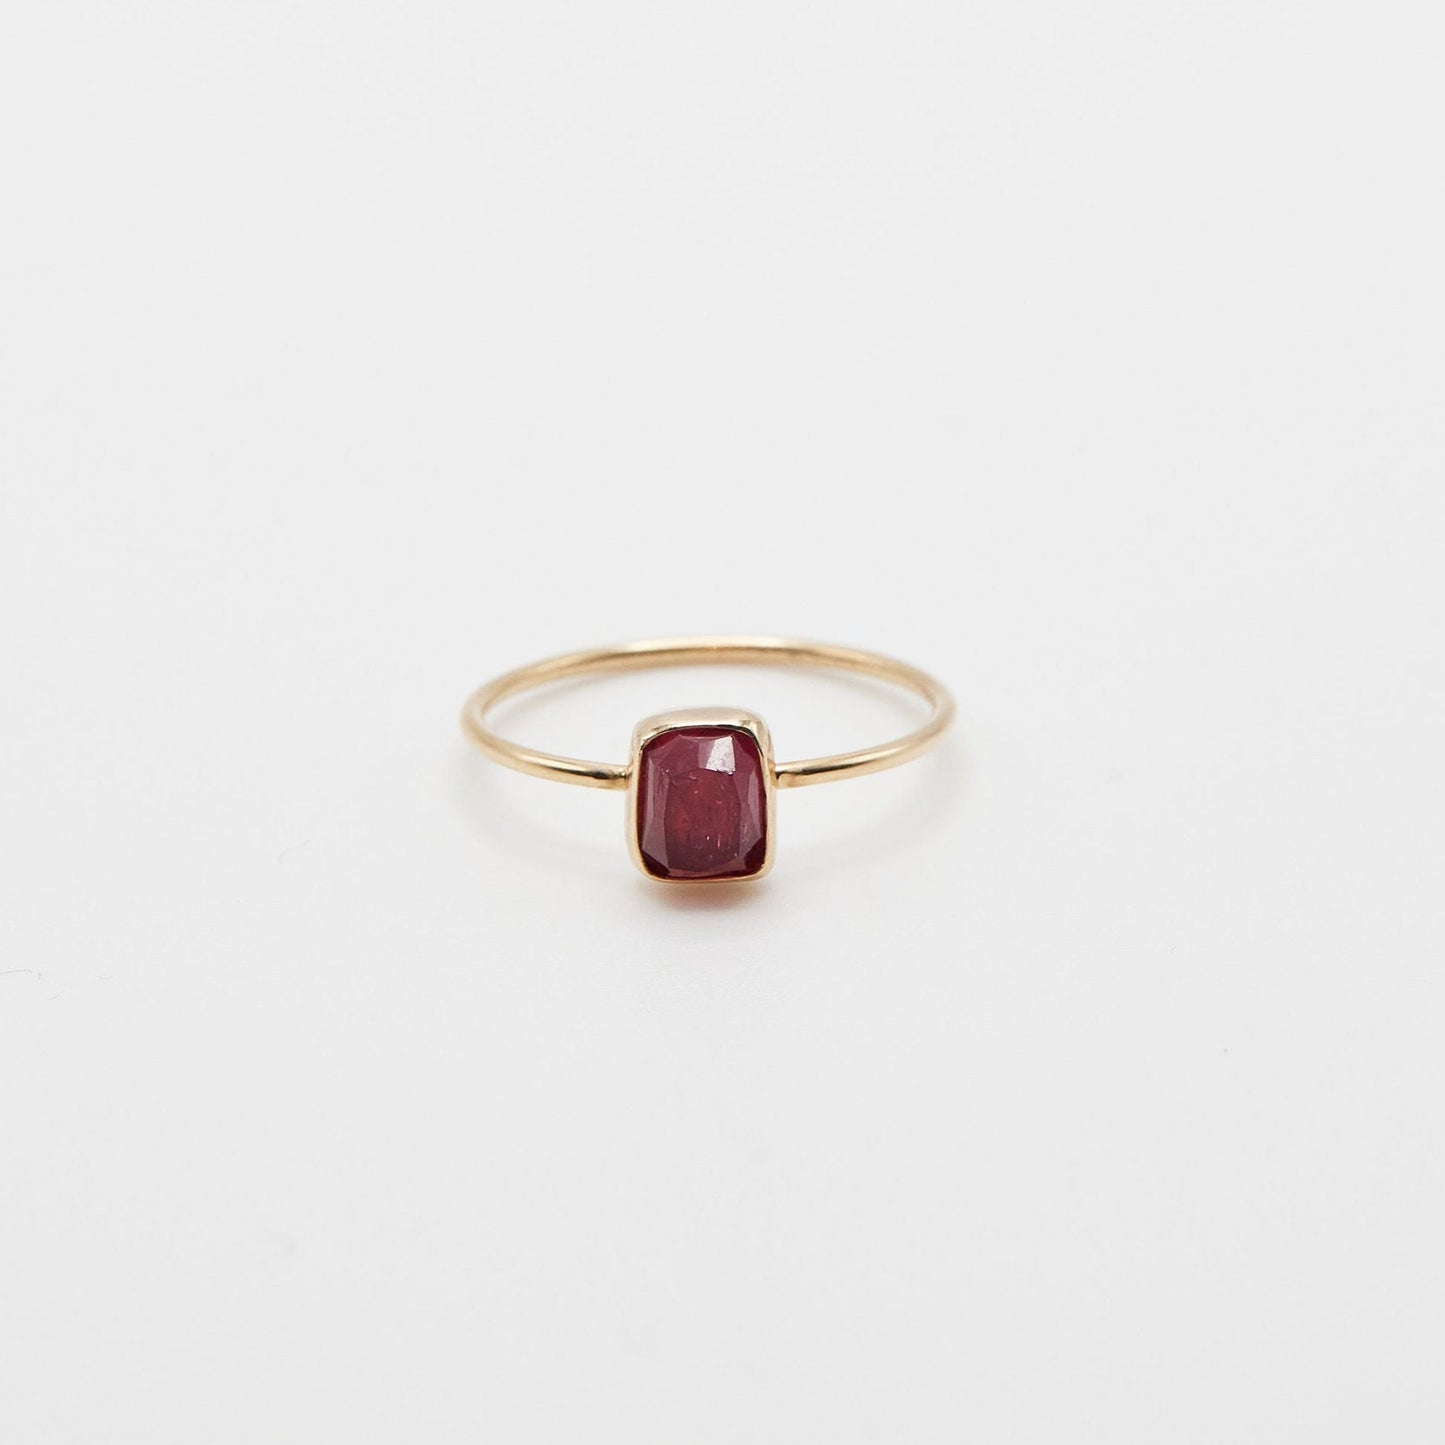 small pink rectangle tourmaline bezel set in 14k yellow gold ring on white background